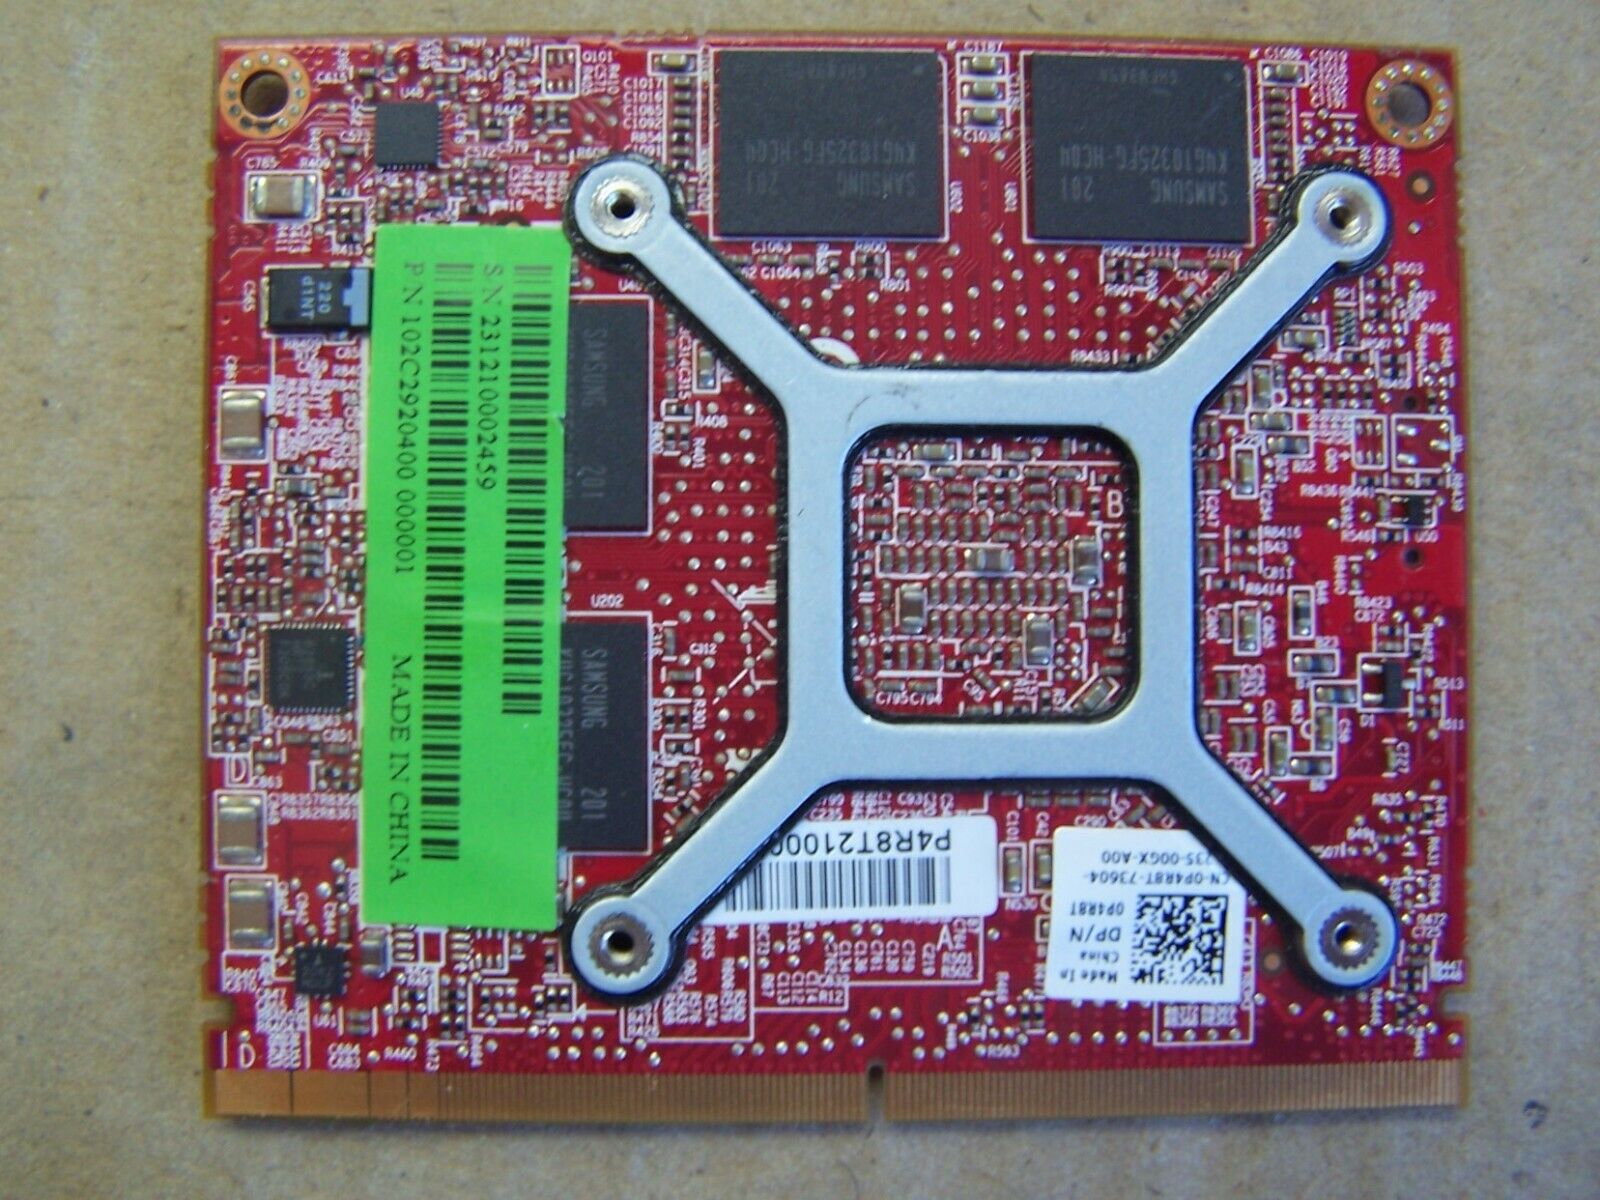 AMD ATI FirePro M5950 MobilityPro Video Card 1gb for Dell Precision M4600  P4R8T for sale online | eBay